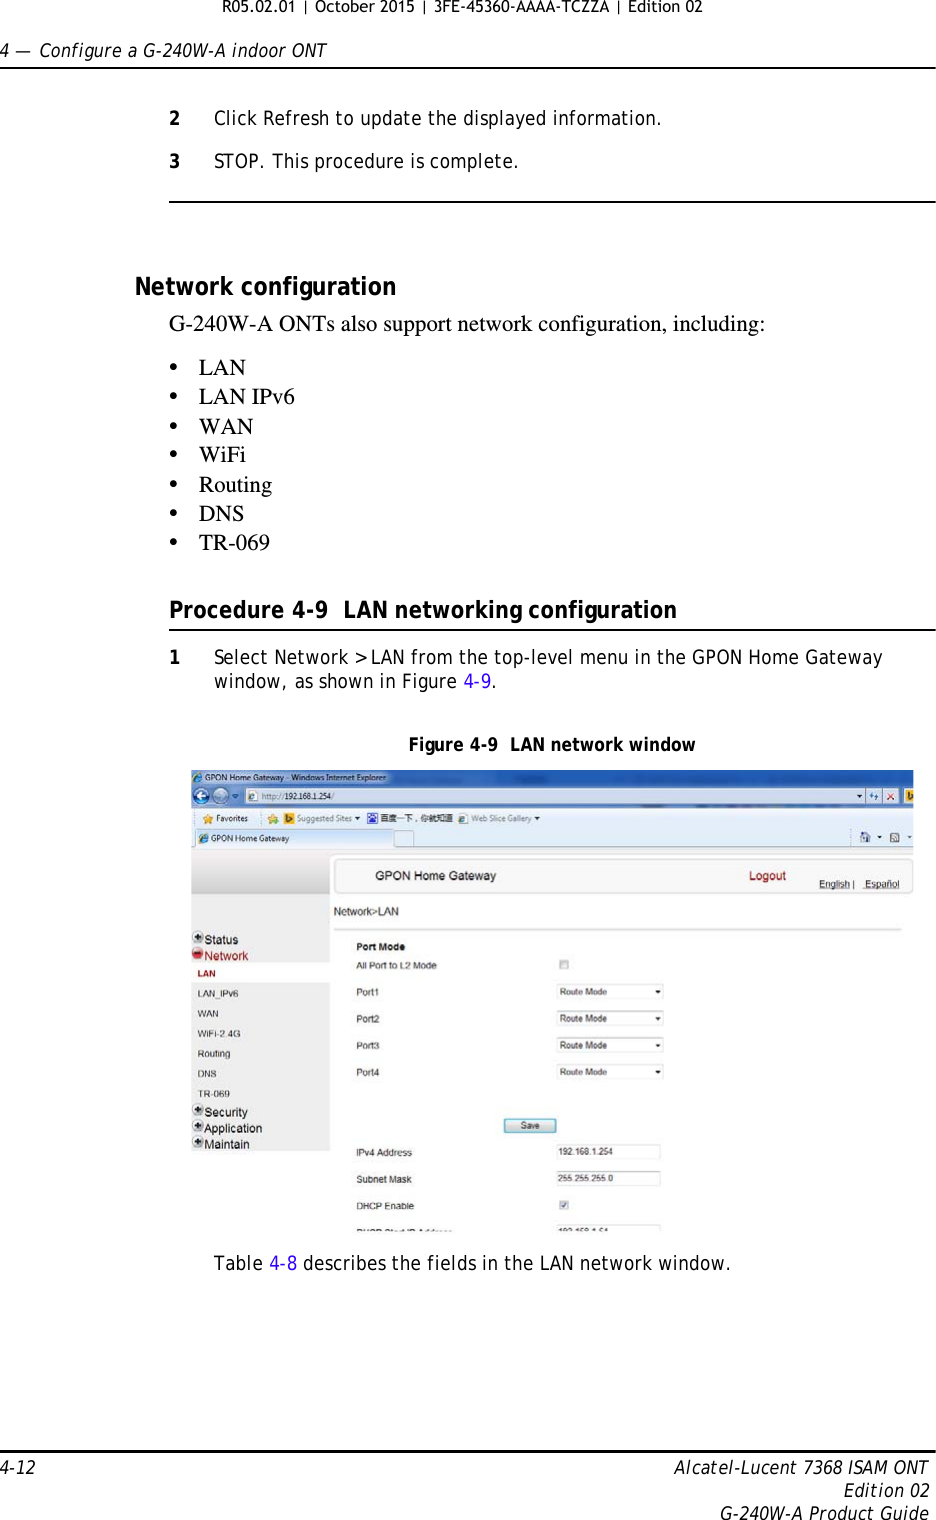 4 —  Configure a G-240W-A indoor ONT4-12 Alcatel-Lucent 7368 ISAM ONTEdition 02G-240W-A Product Guide2Click Refresh to update the displayed information. 3STOP. This procedure is complete.Network configurationG-240W-A ONTs also support network configuration, including:•LAN•LAN IPv6•WAN•WiFi•Routing•DNS•TR-069Procedure 4-9  LAN networking configuration1Select Network &gt; LAN from the top-level menu in the GPON Home Gateway window, as shown in Figure 4-9.Figure 4-9  LAN network windowTable 4-8 describes the fields in the LAN network window. R05.02.01 | October 2015 | 3FE-45360-AAAA-TCZZA | Edition 02 